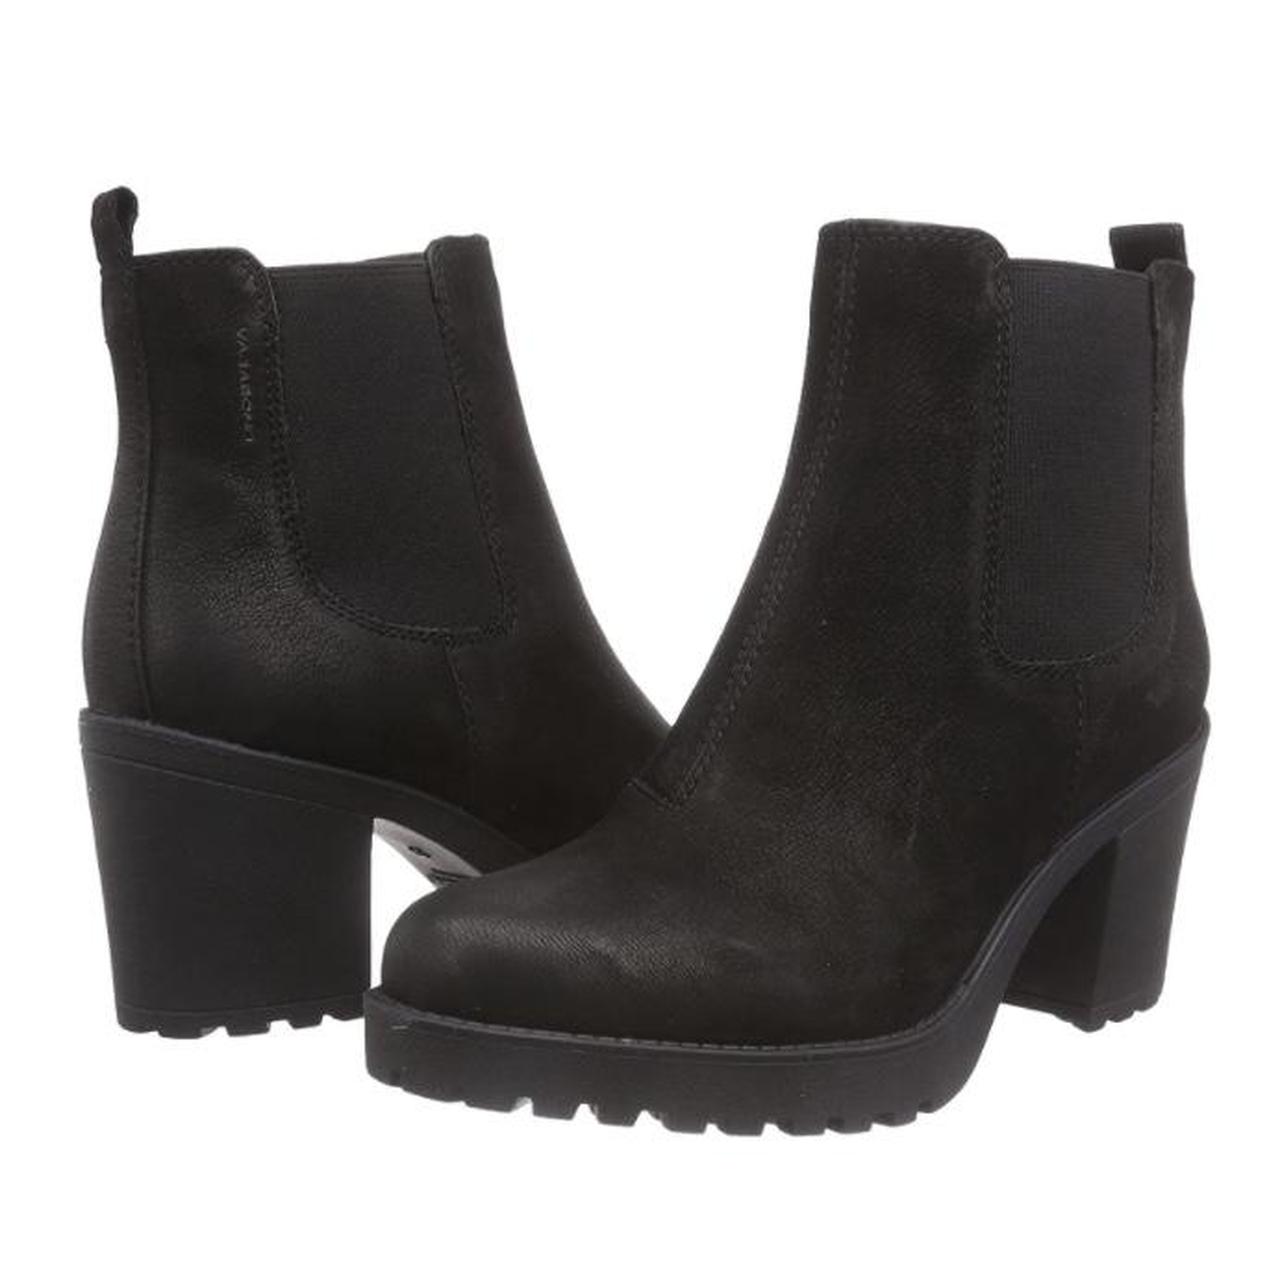 vagabond grace heeled boots in -